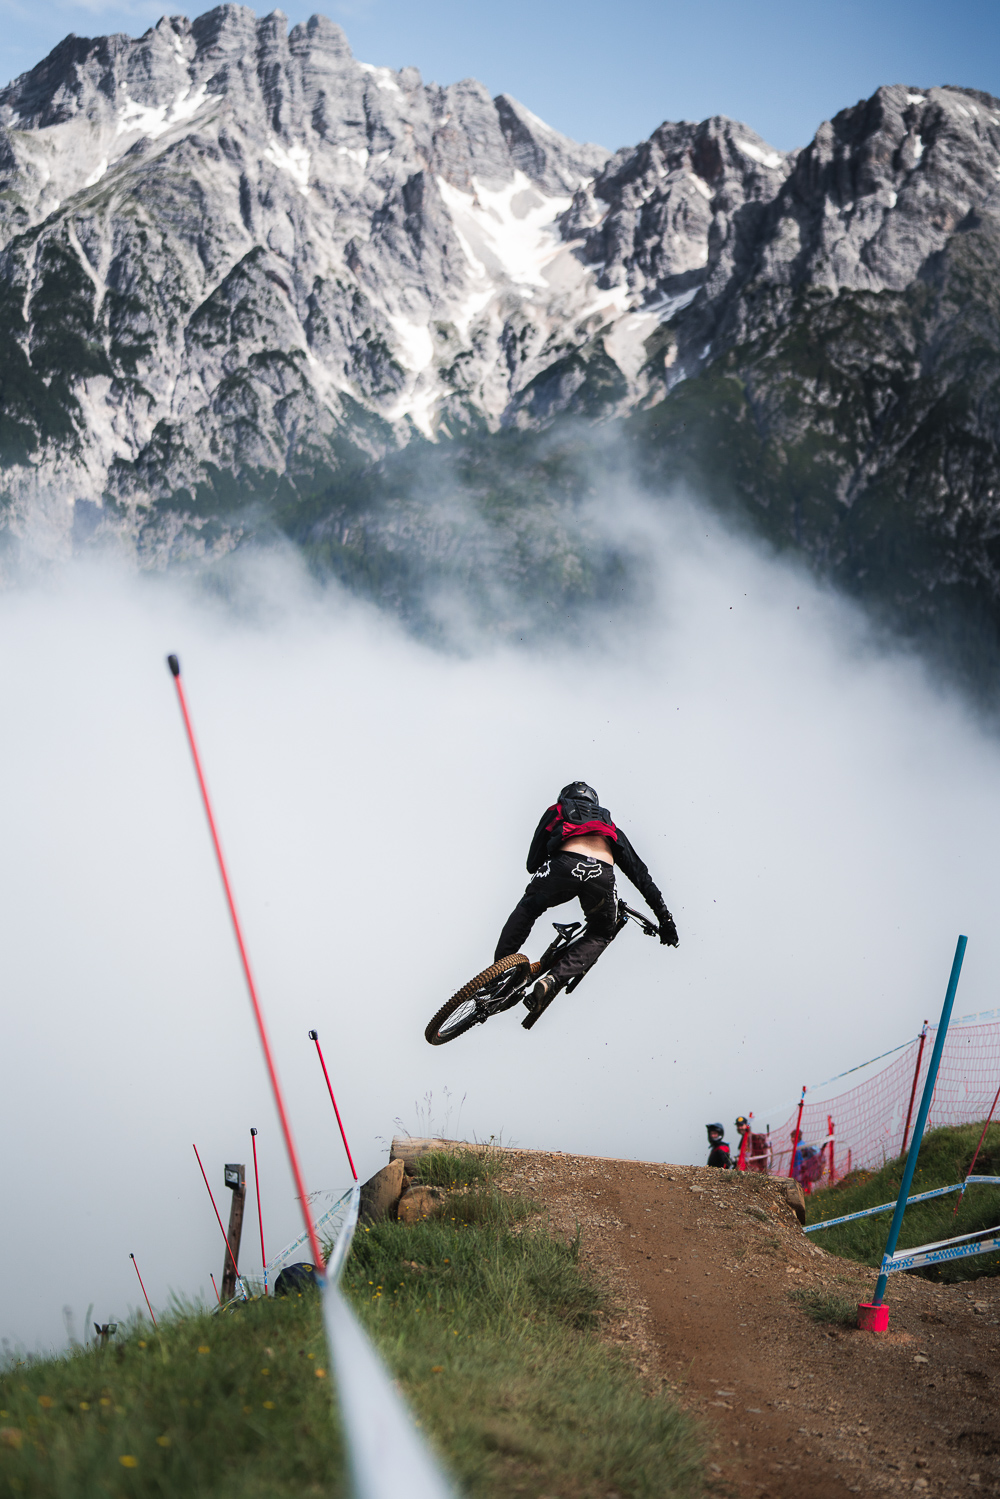 Dramatic pictures are always a given in Leogang!